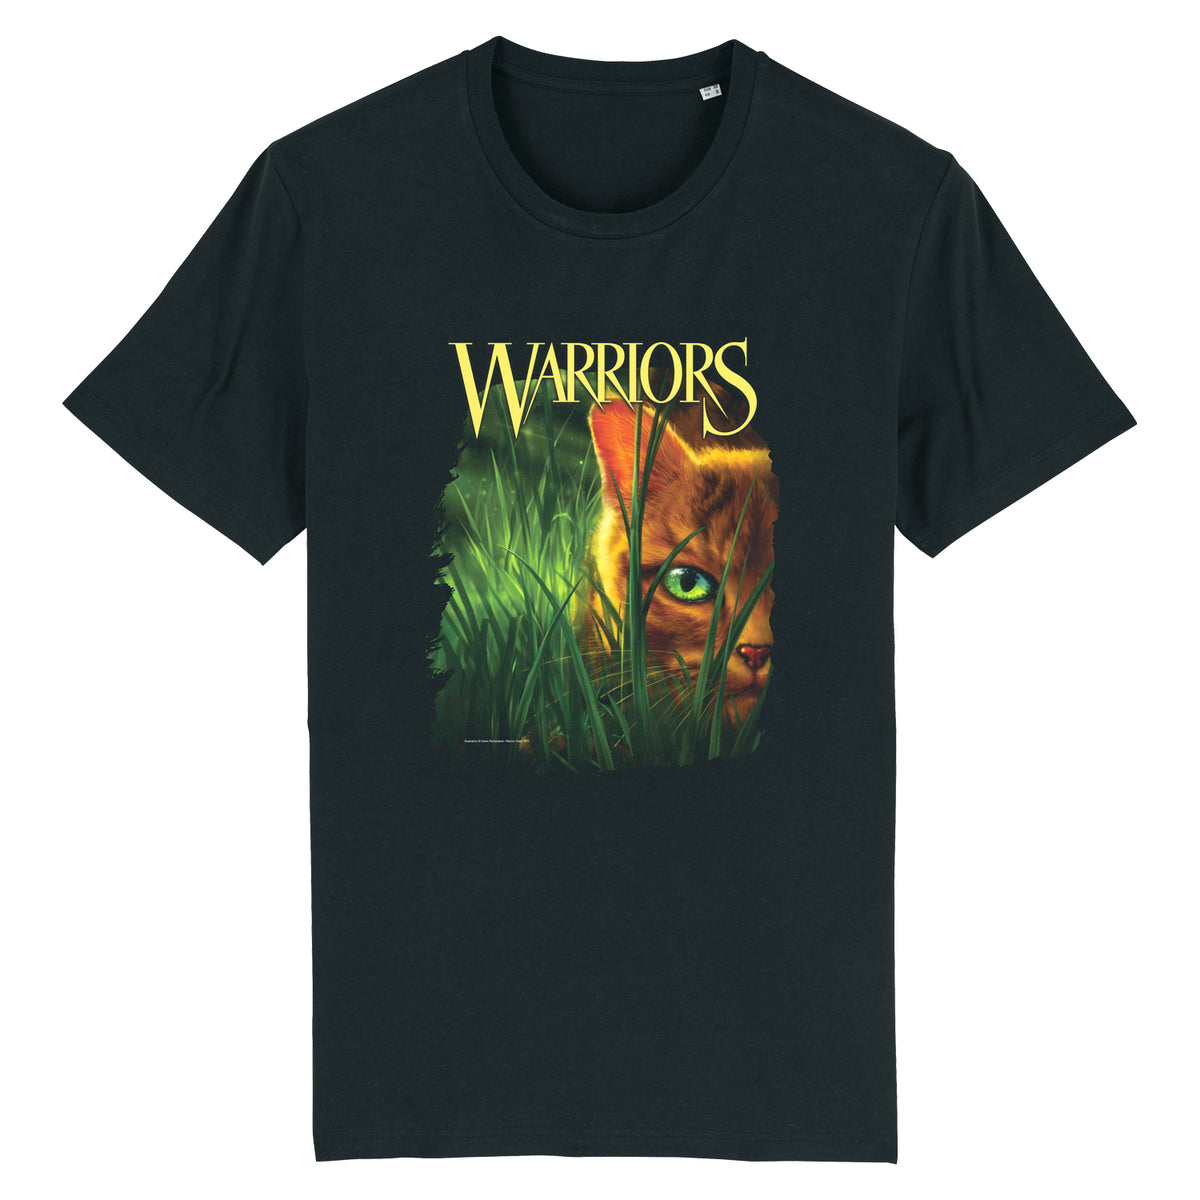 Into The Wild - Youth Unisex T-Shirt